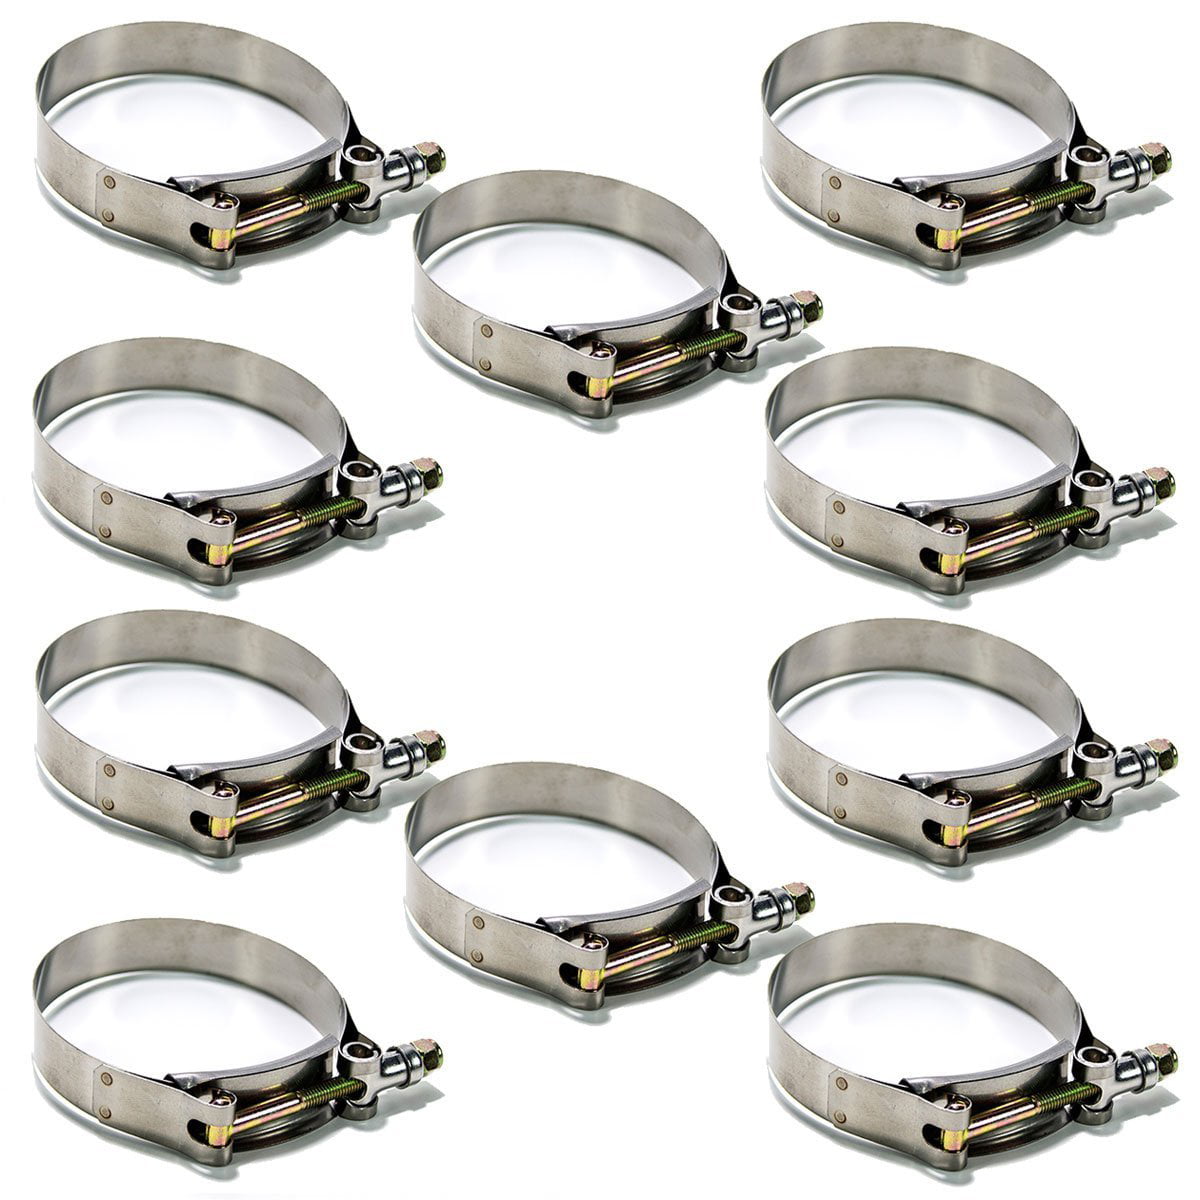 Squirrelly 2 Heavy Duty Stainless Steel T-Bolt Clamp for 2 inch Turbo Intake Intercooler Hose 10 Pack 